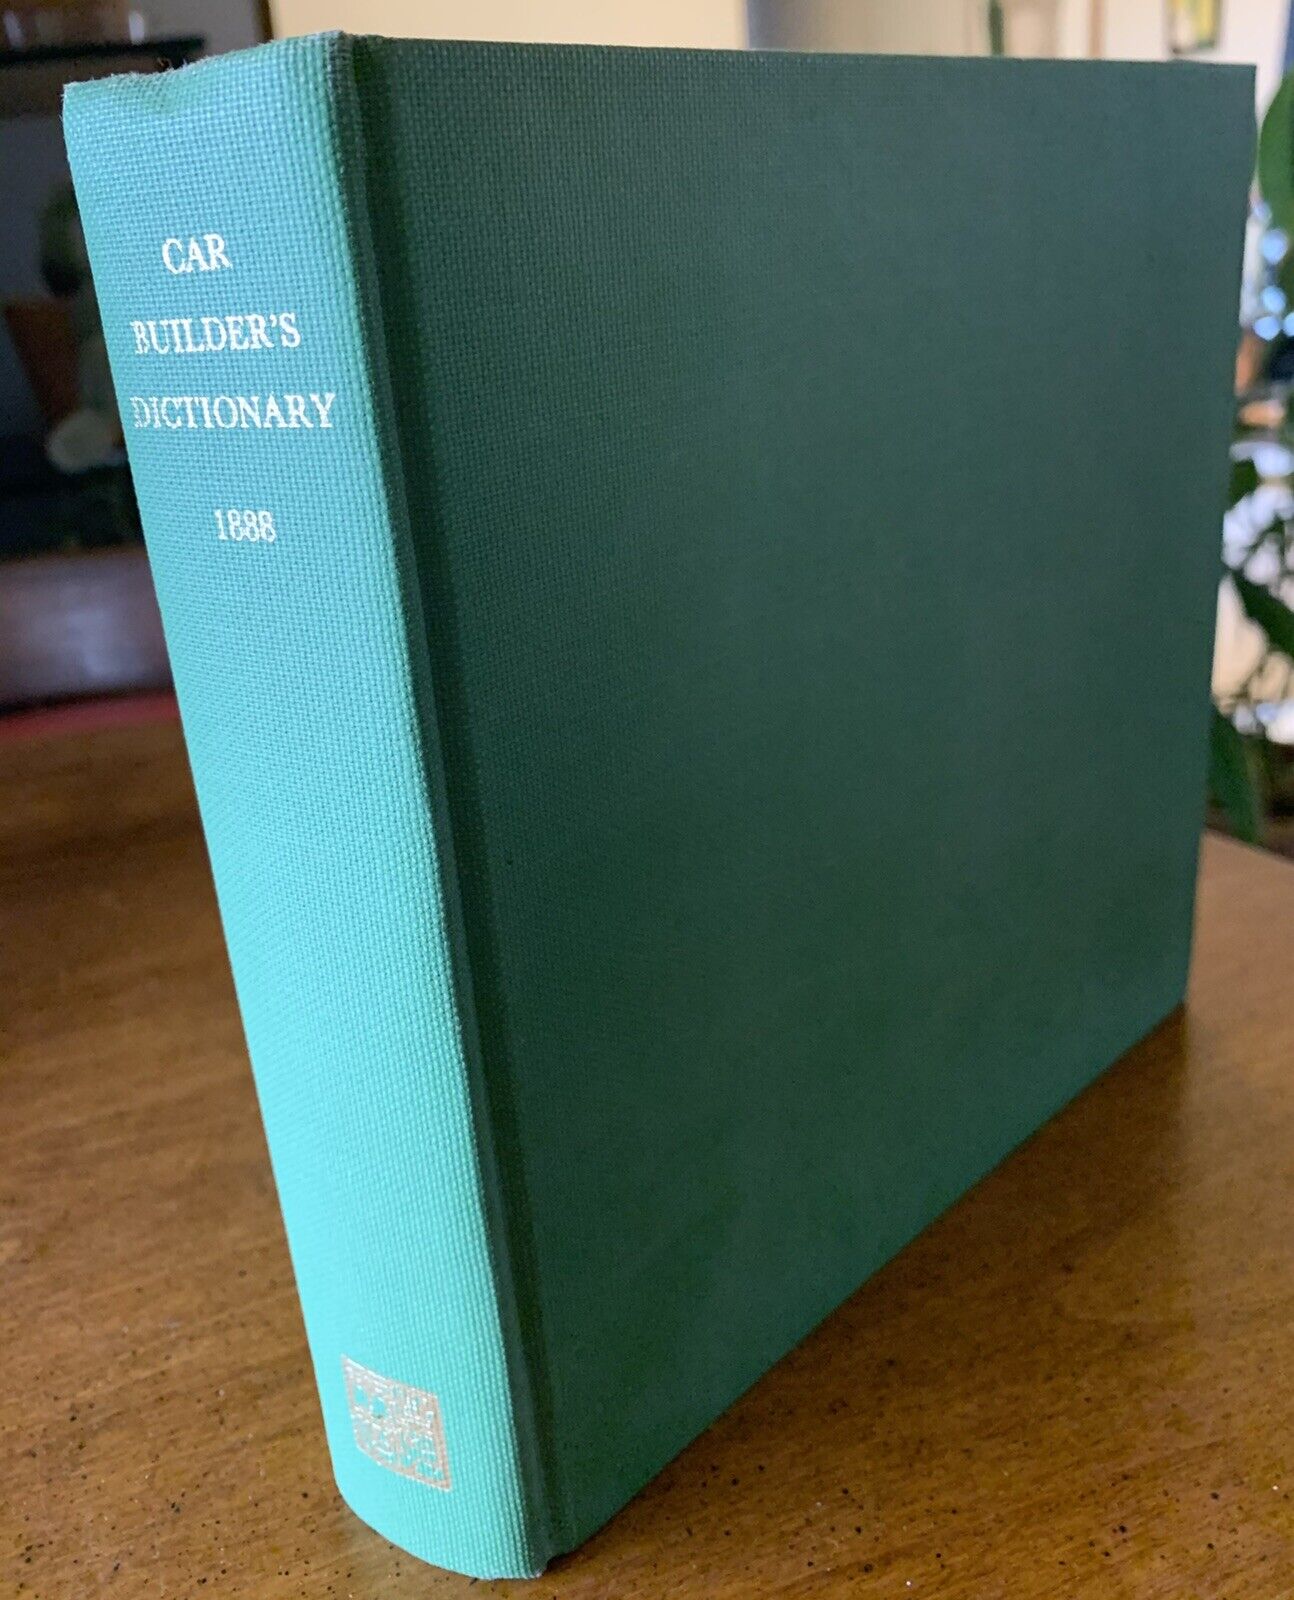 The Car Builder’s Dictionary (1888) HB Library Bound